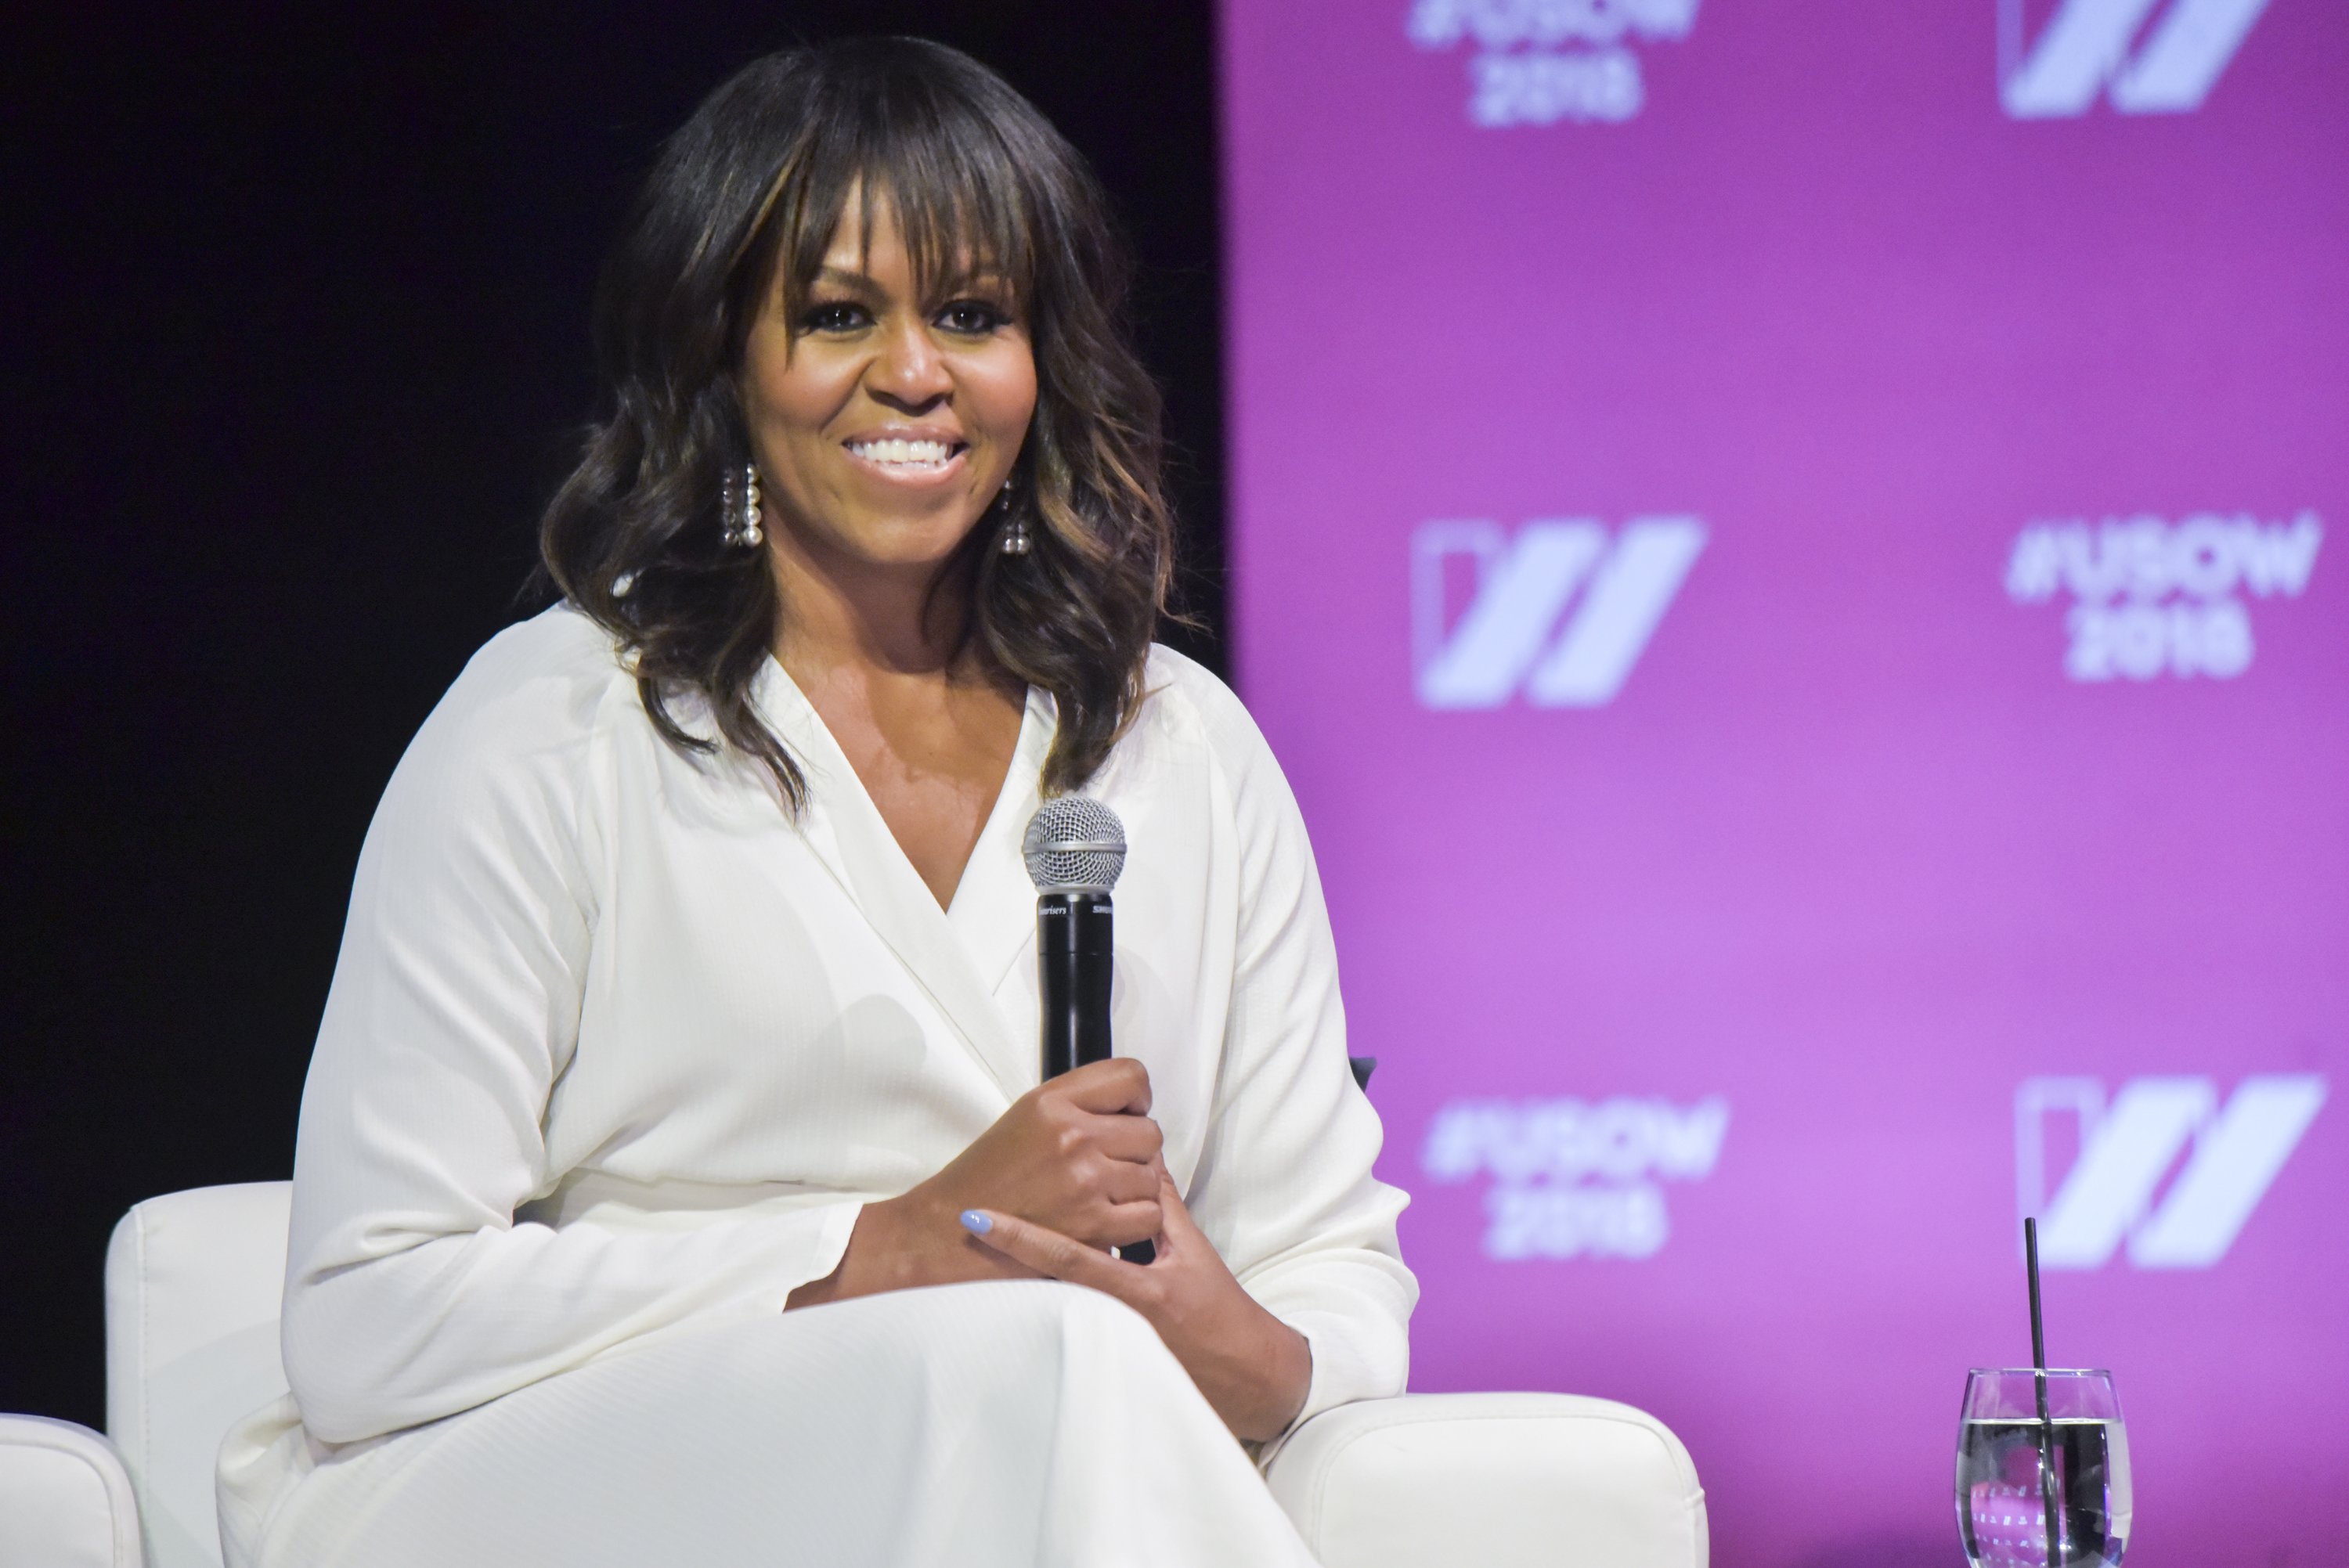 Michelle Obama speaks on stage at The United State of Women Summit 2018 - Day 1 on May 5, 2018. | Photo: GettyImages